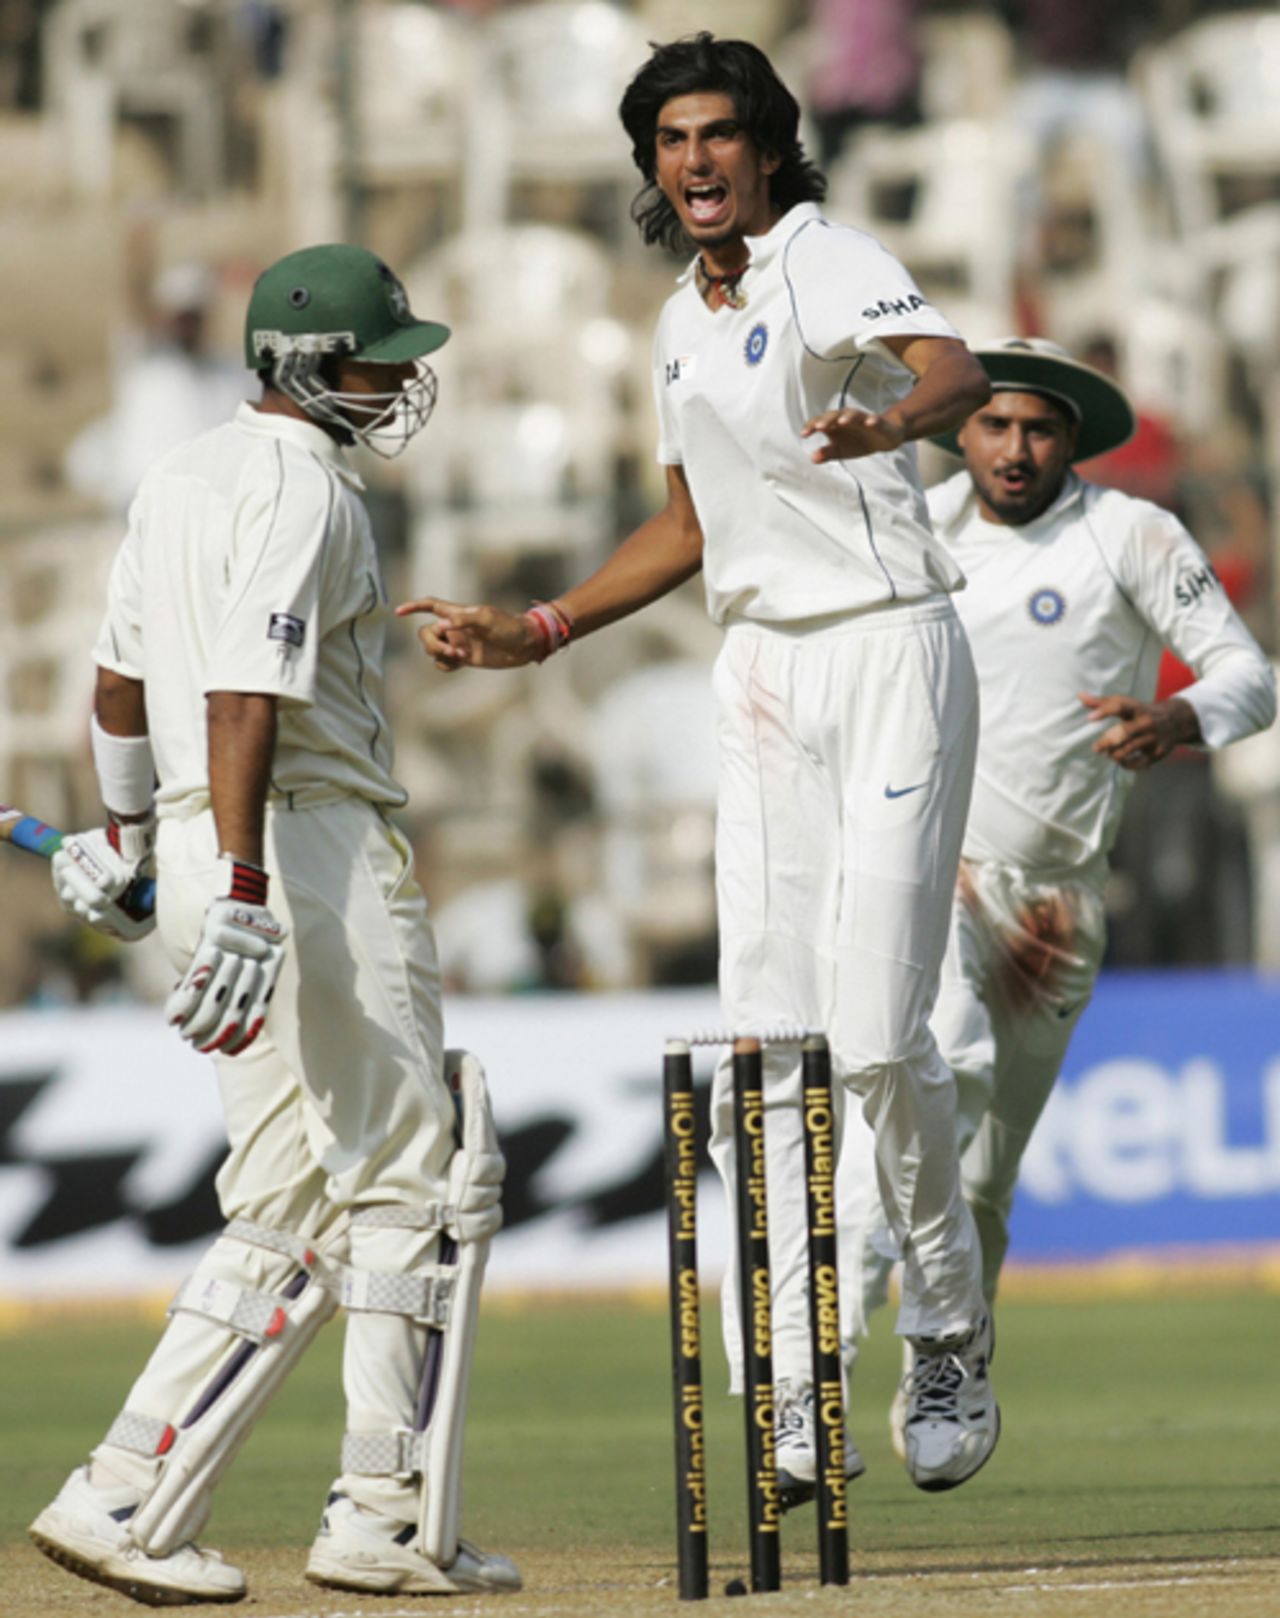 Ishant Sharma is delighted after dismissing Faisal Iqbal, India v Pakistan, 3rd Test, Bangalore, 3rd day, December 10, 2007 

